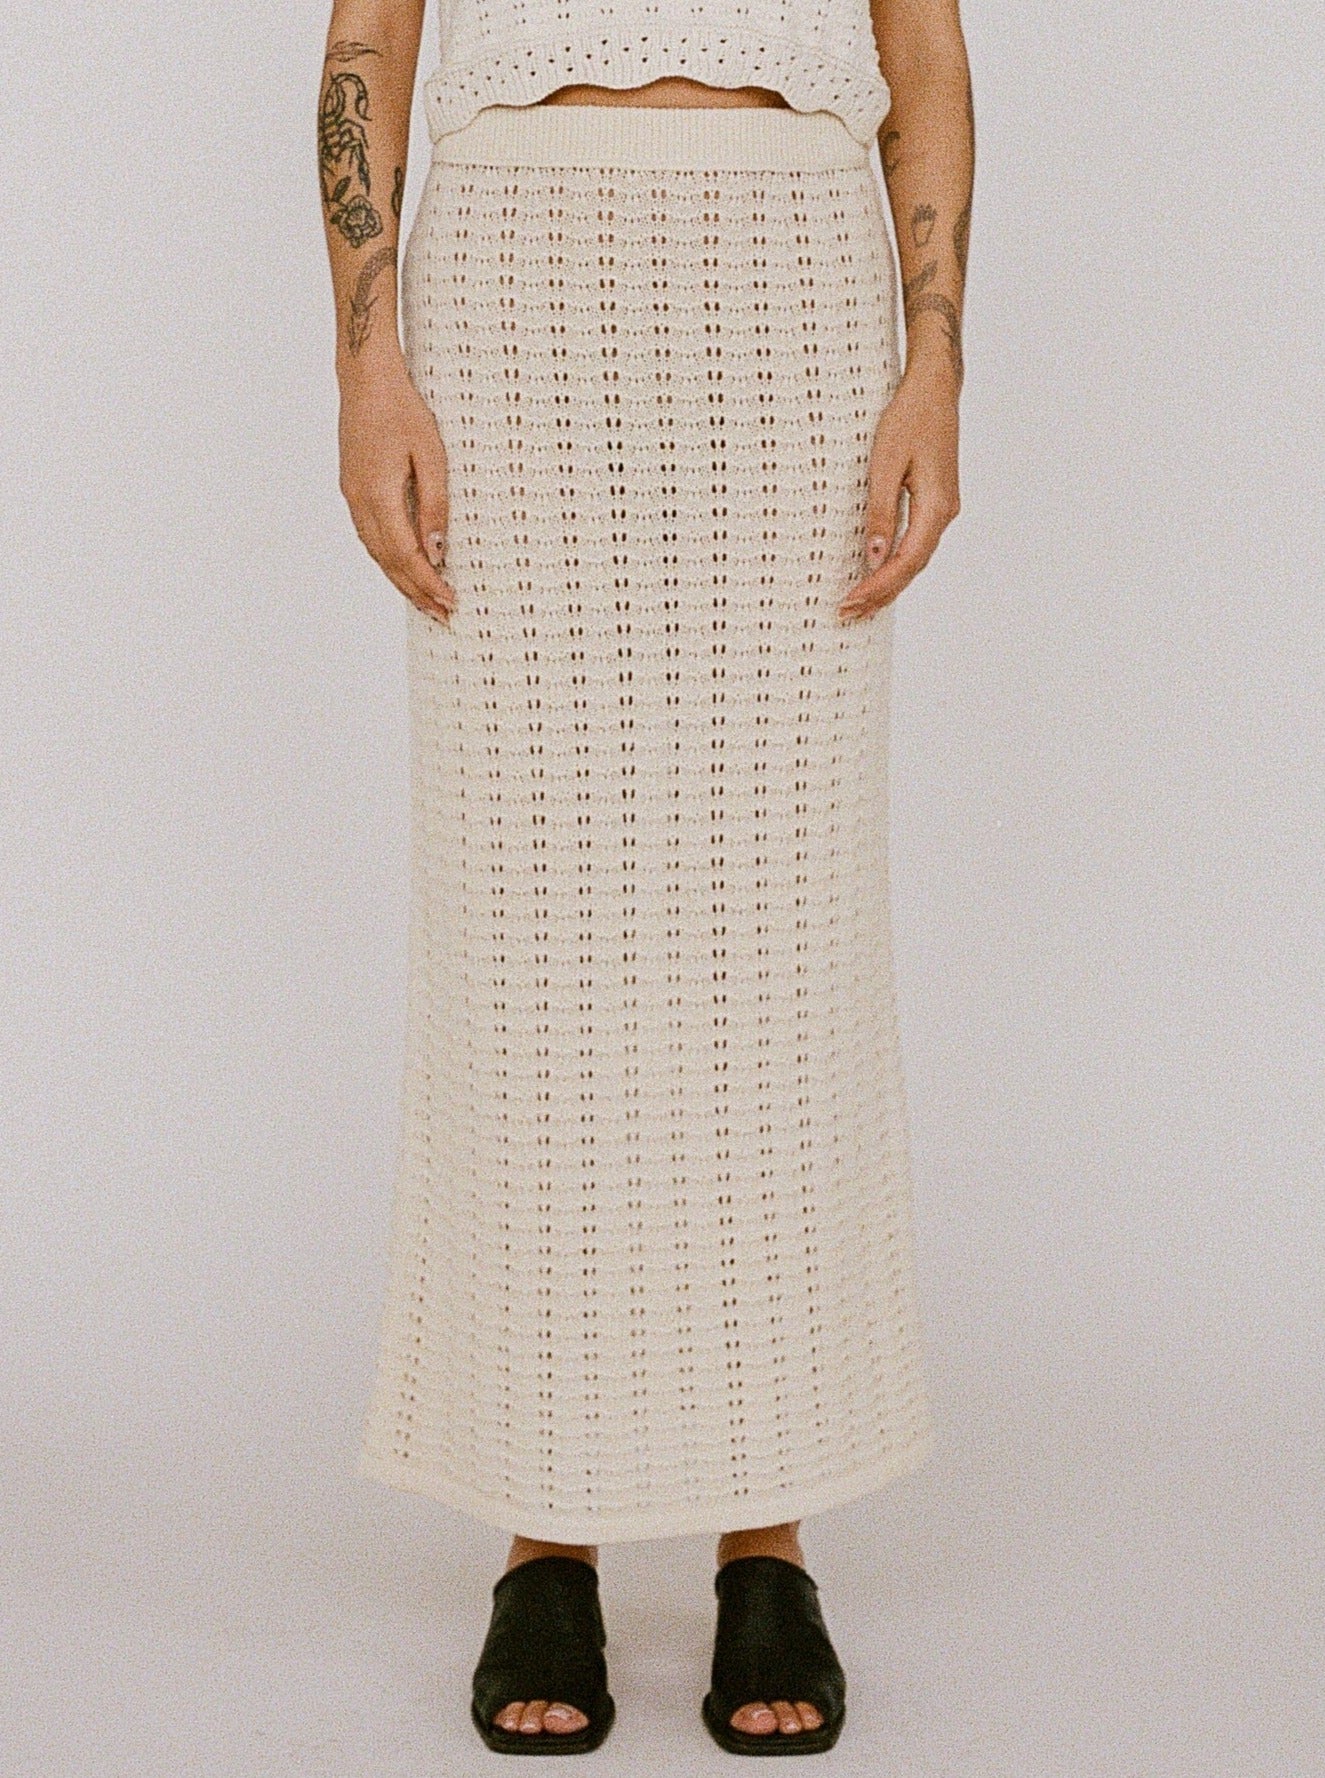 Woman standing in a 100% cotton, white crocheted top and Straight Knit Skirt - Ivory ensemble against a neutral backdrop.